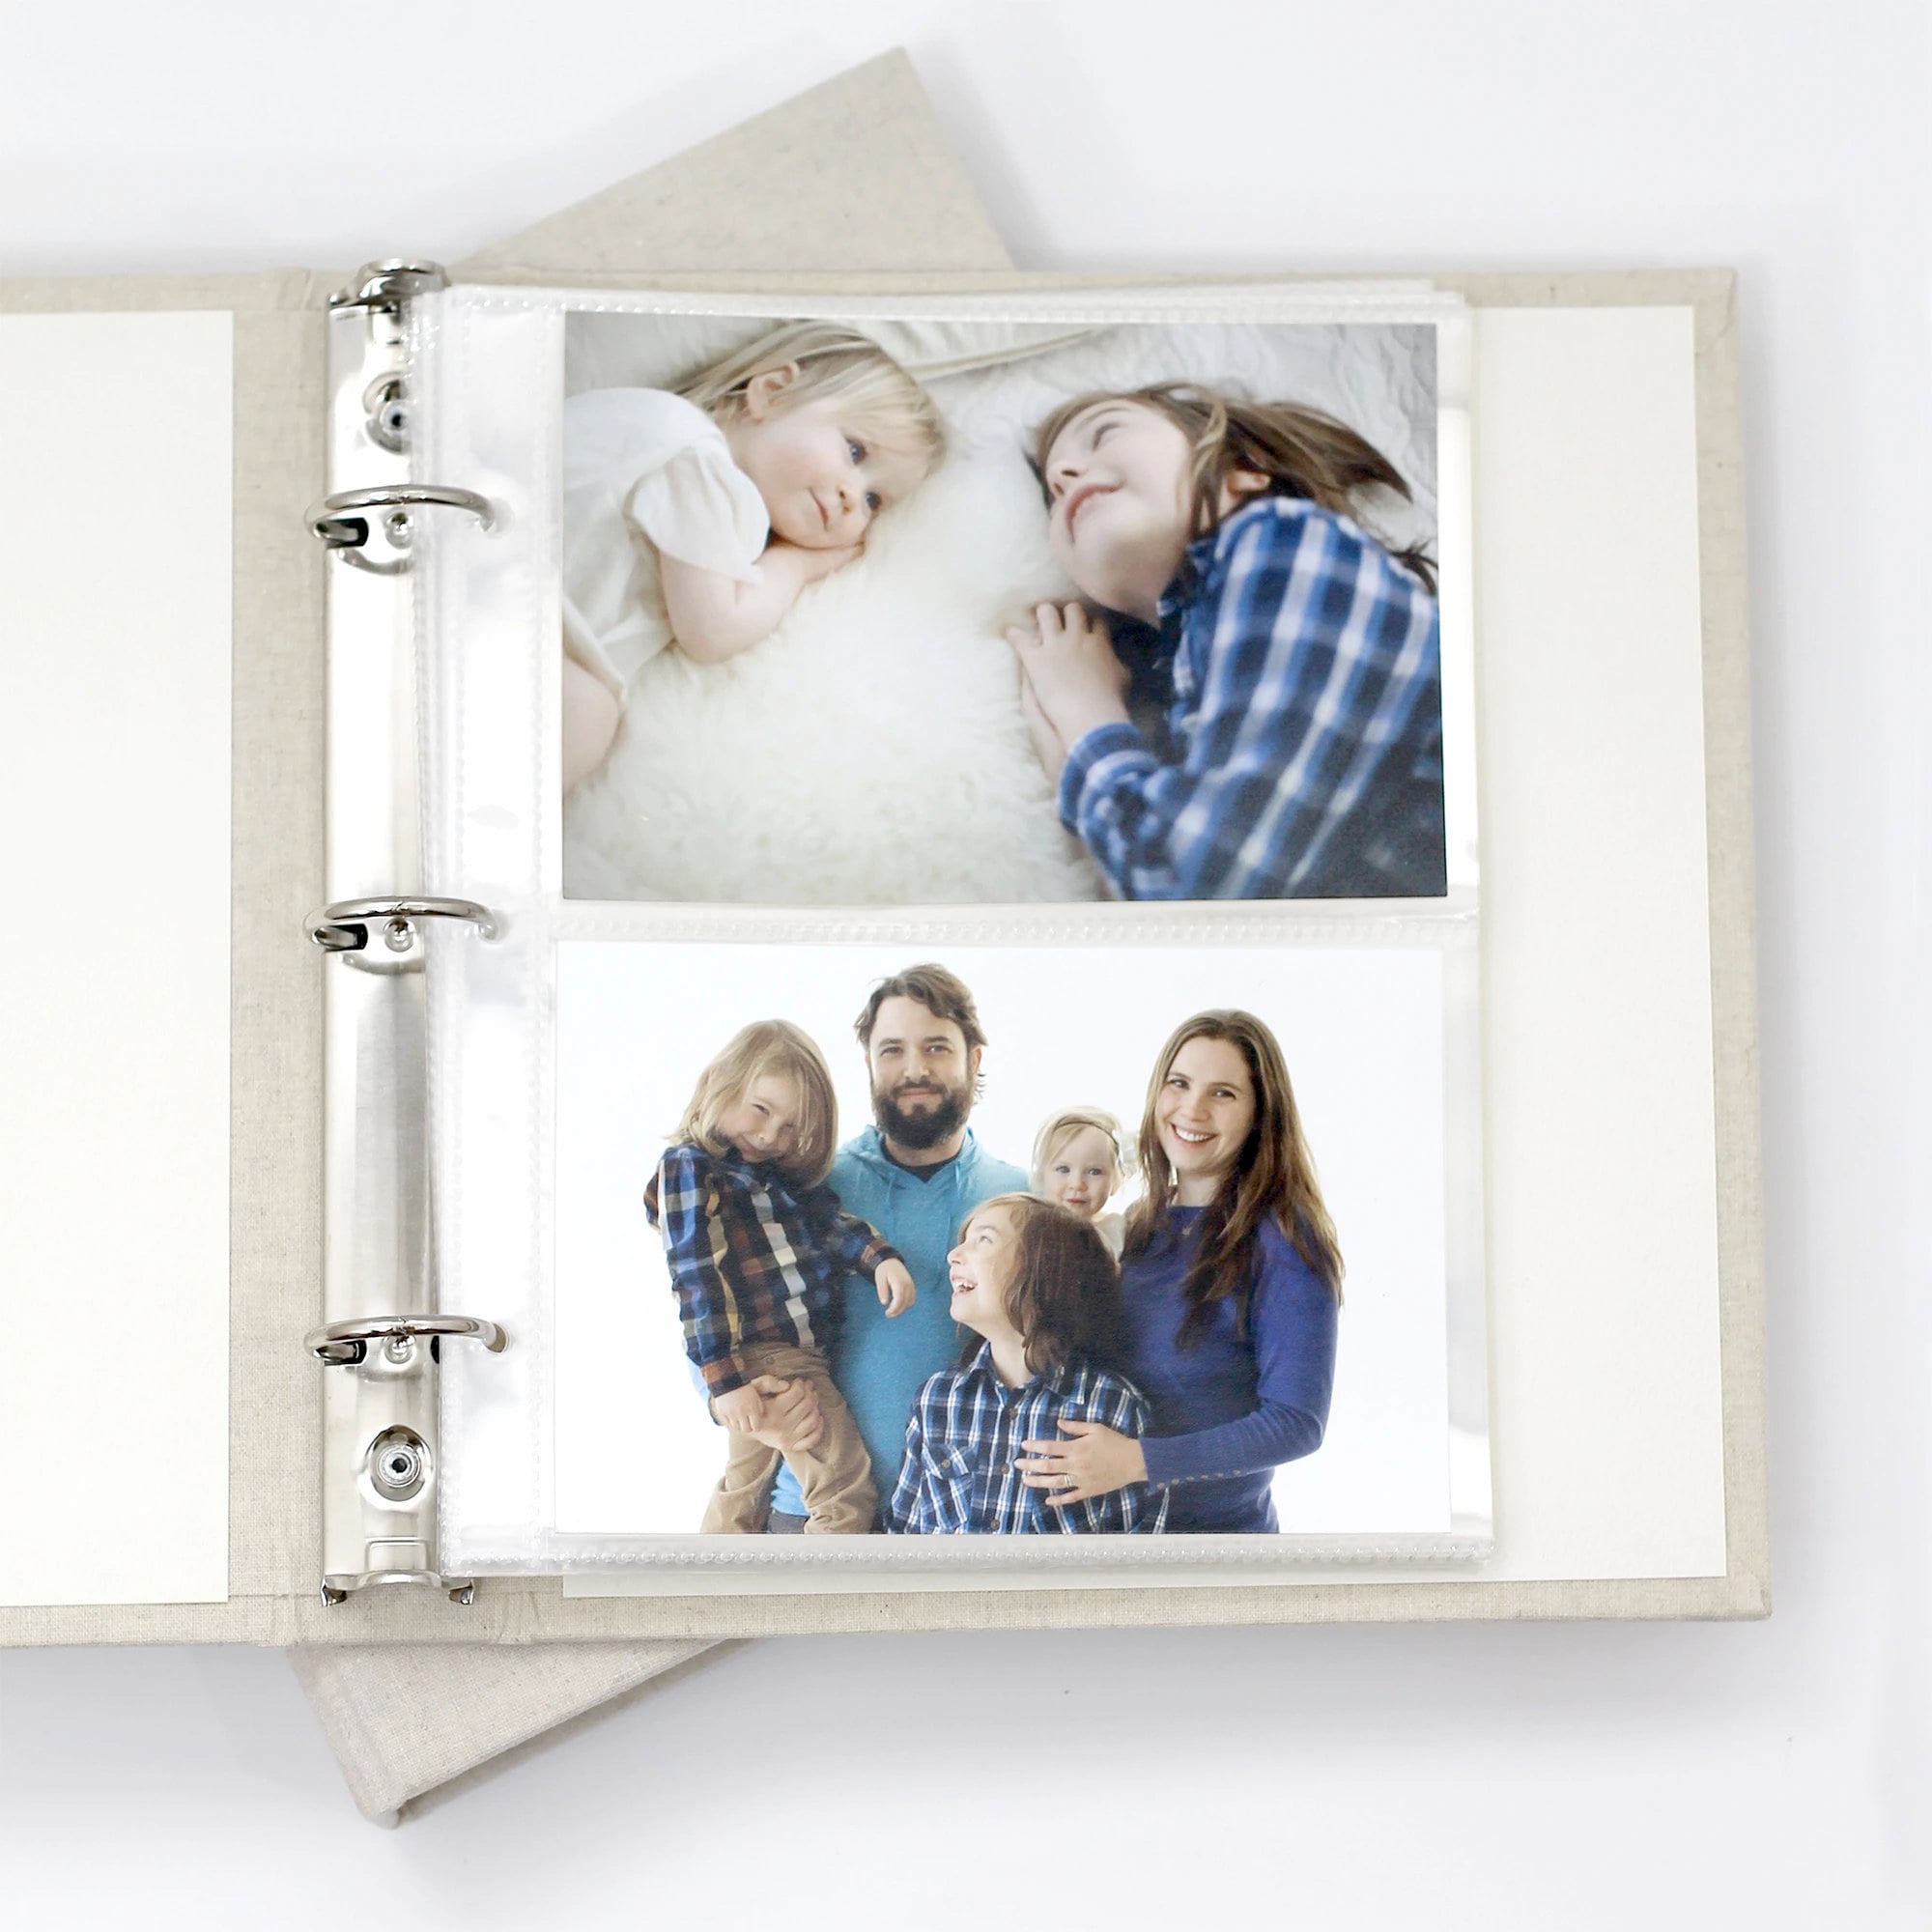 4x6 Photo Binder Sleeves 10 Sleeves per Pack for 40 4x6 Photos 